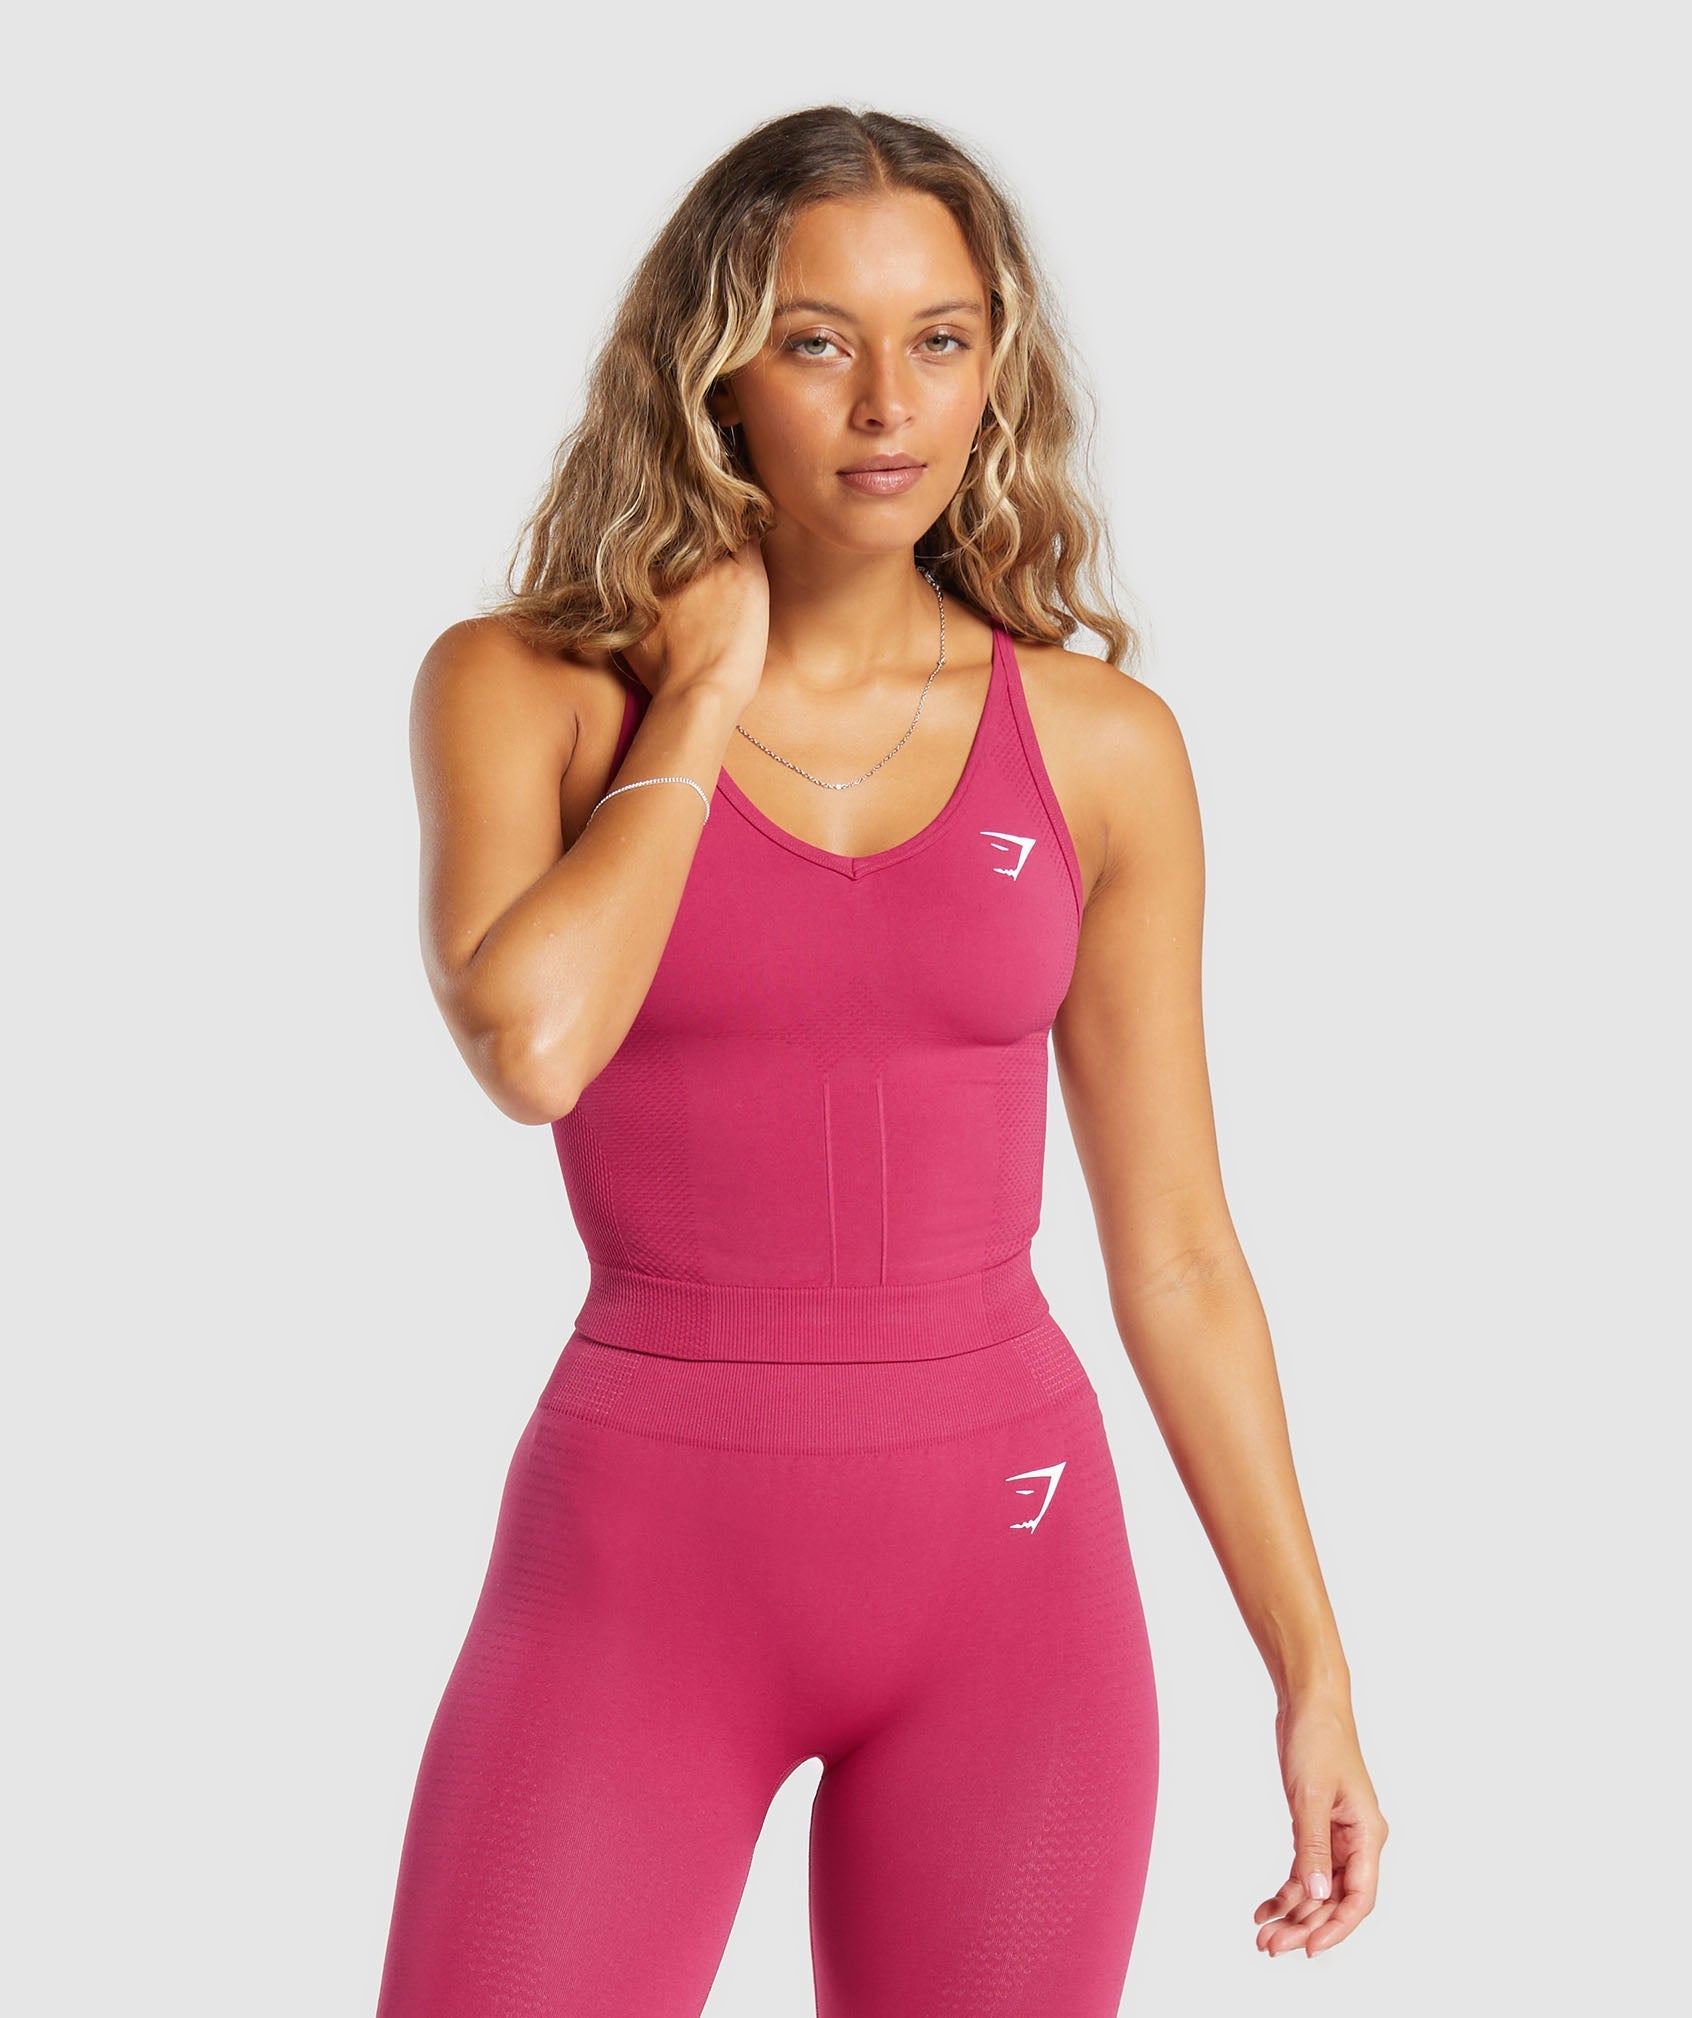 Vital Seamless 2.0 Midi Tank in Vintage Pink/Marl is out of stock